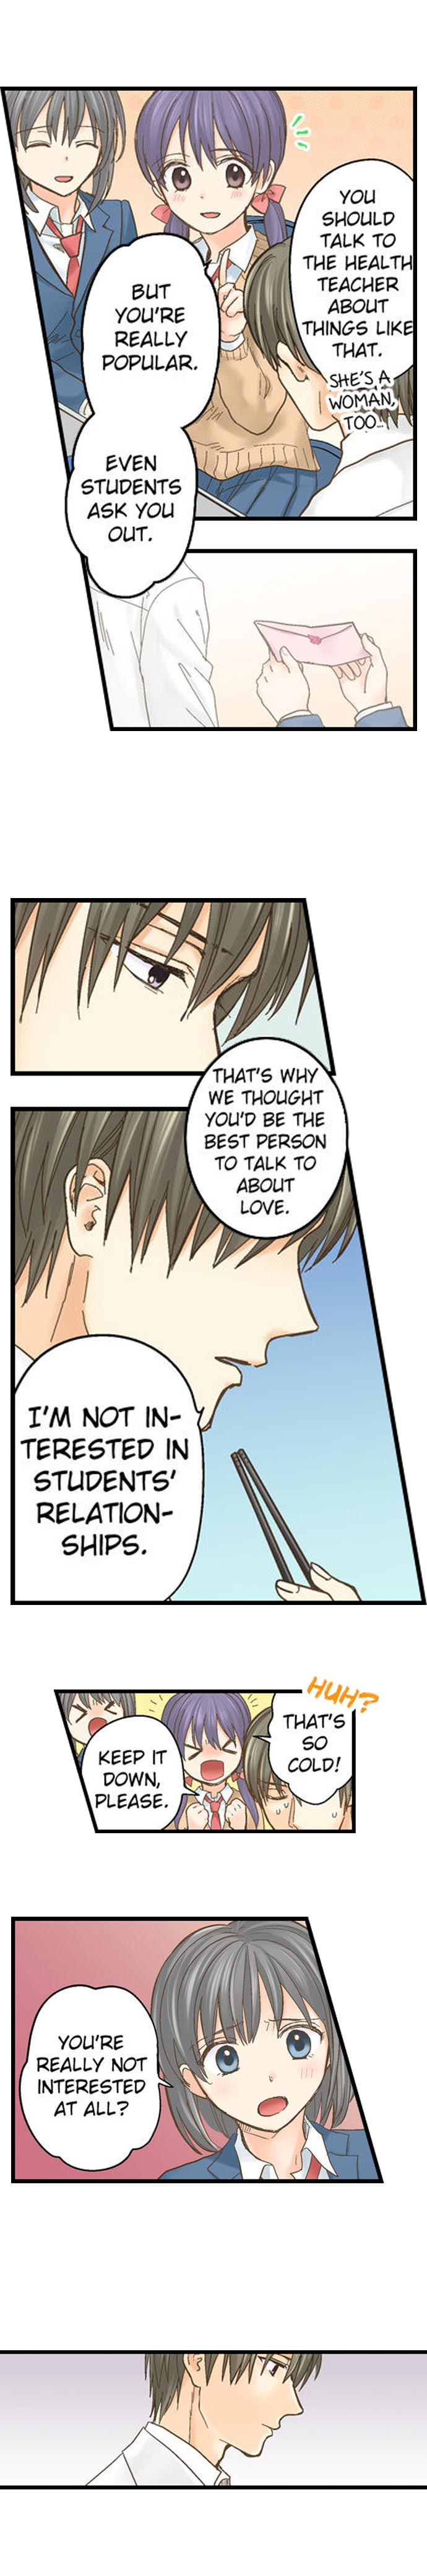 Running a Love Hotel with My Math Teacher - Chapter 52 Page 9